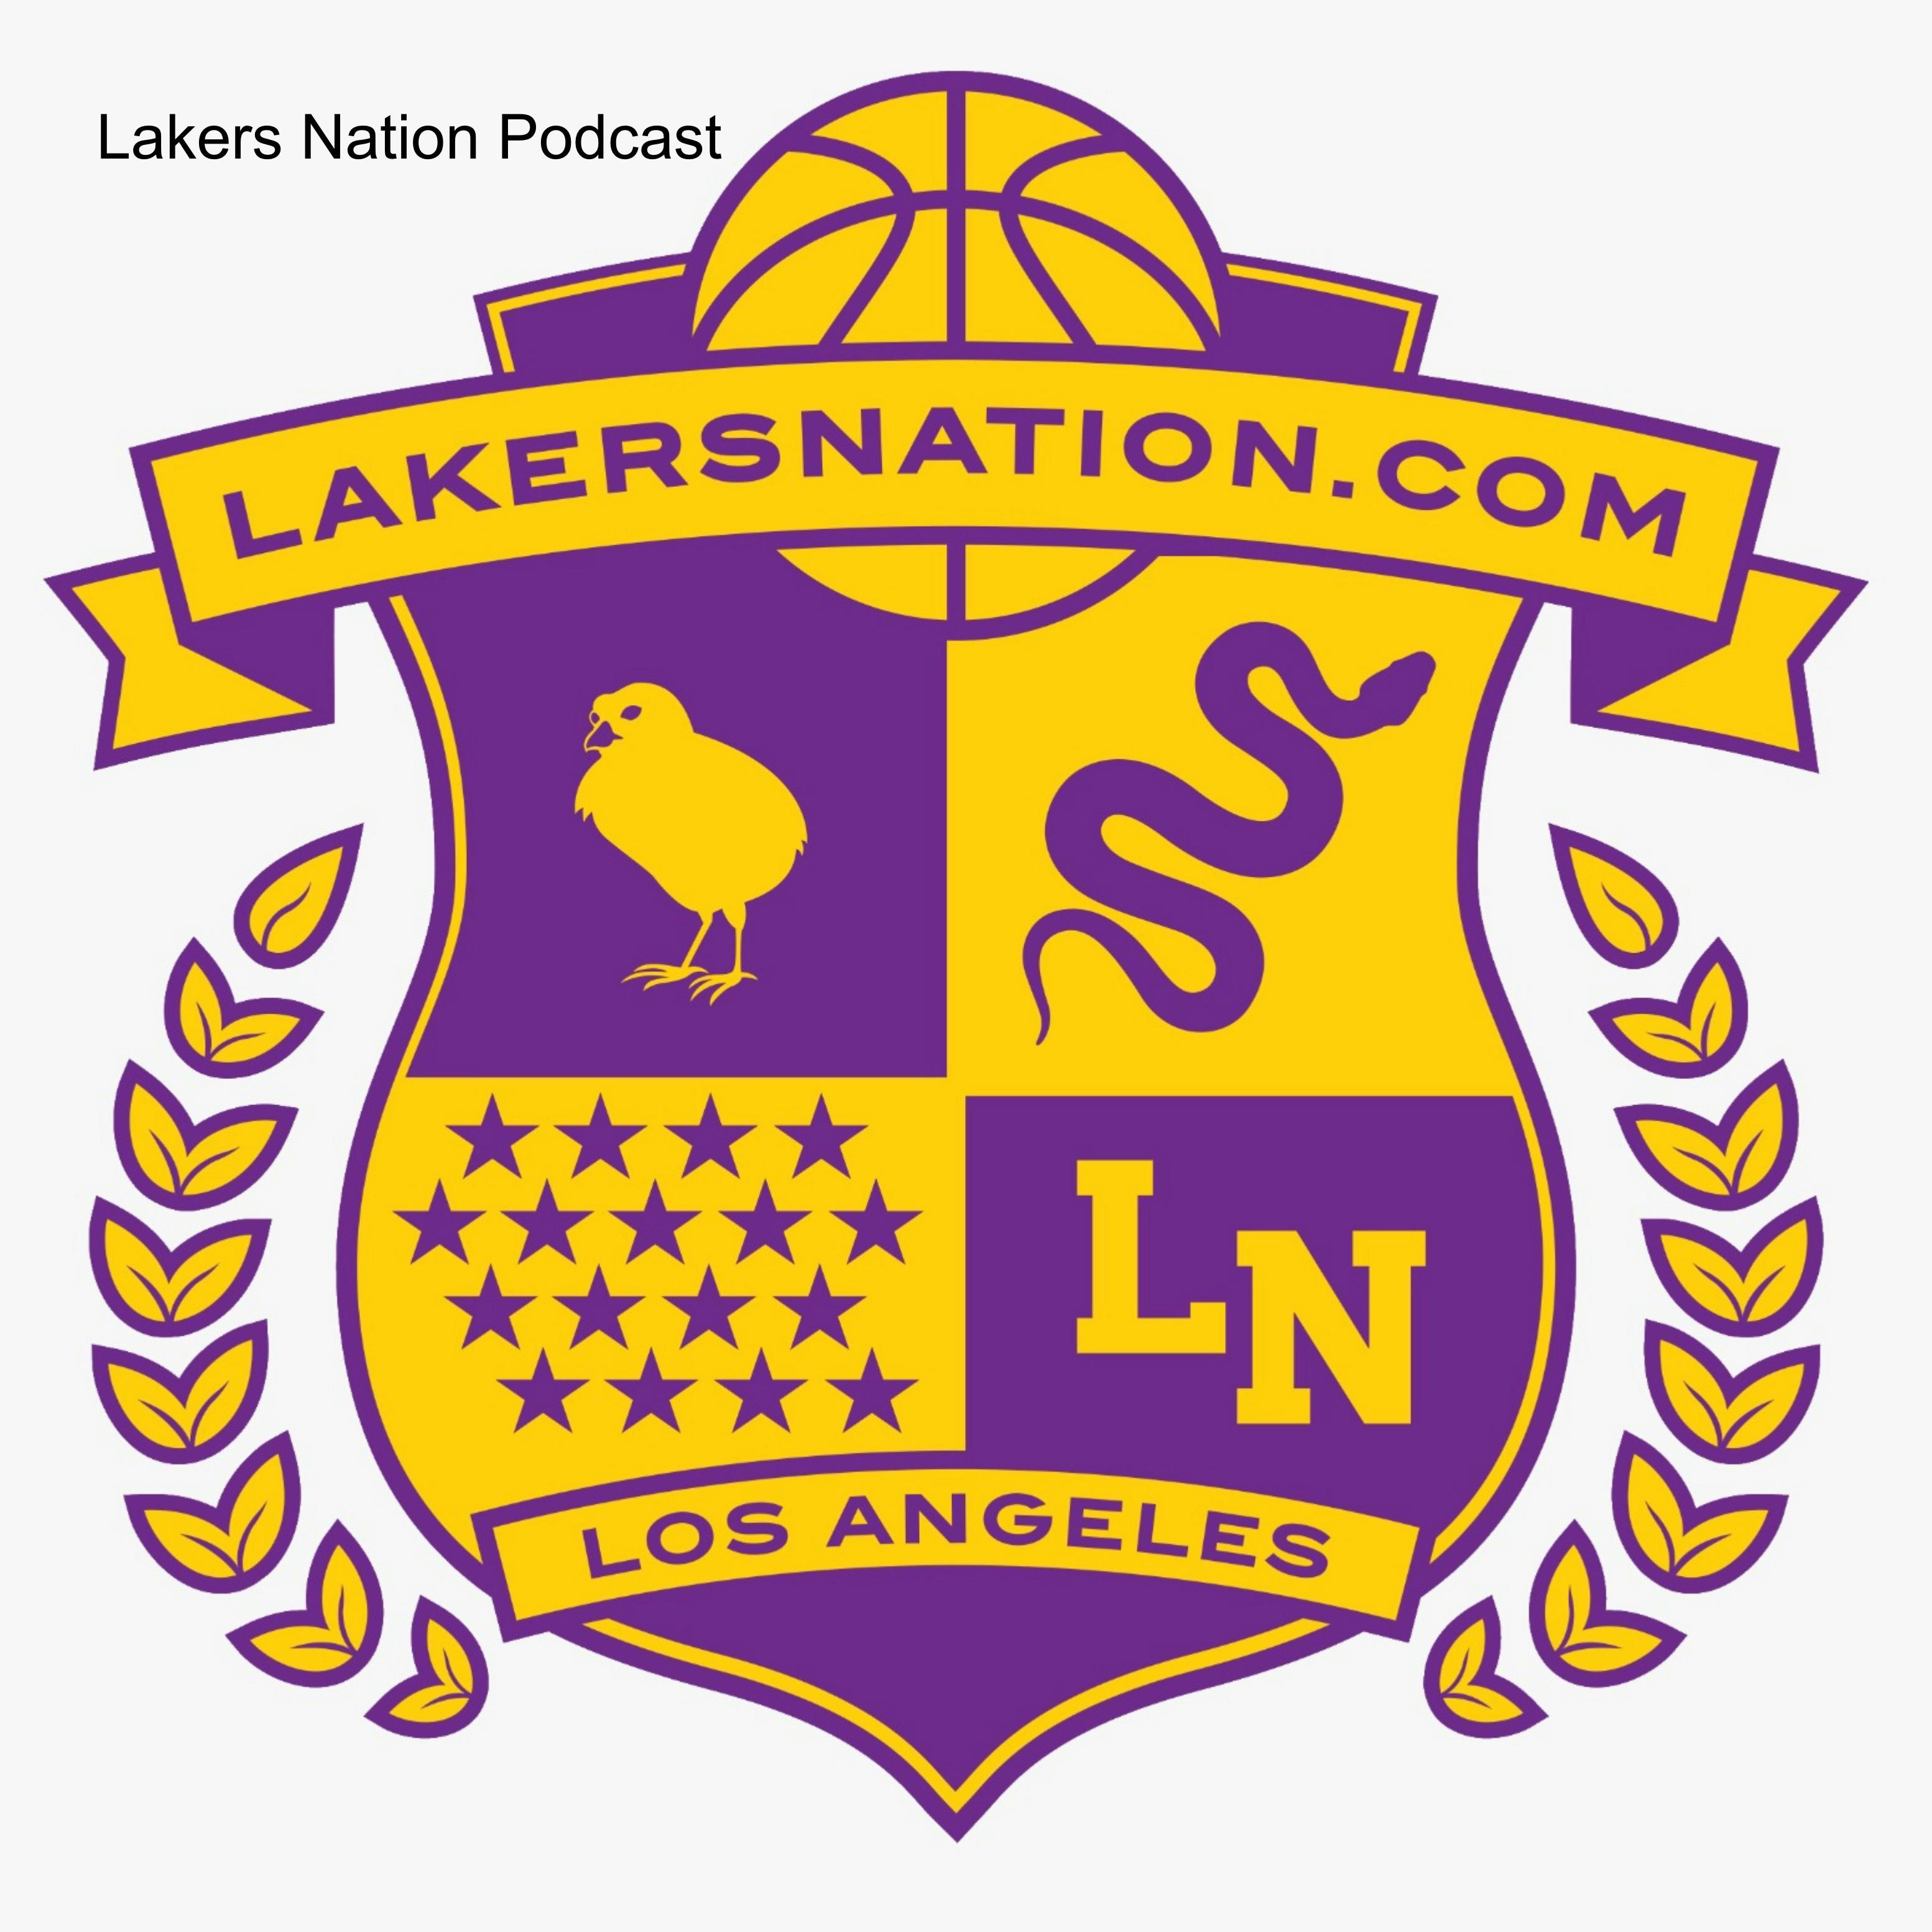 Taurean Prince Joins The Show To Talk Lakers Season, Free Agency, Darvin Ham, The Playoffs And More